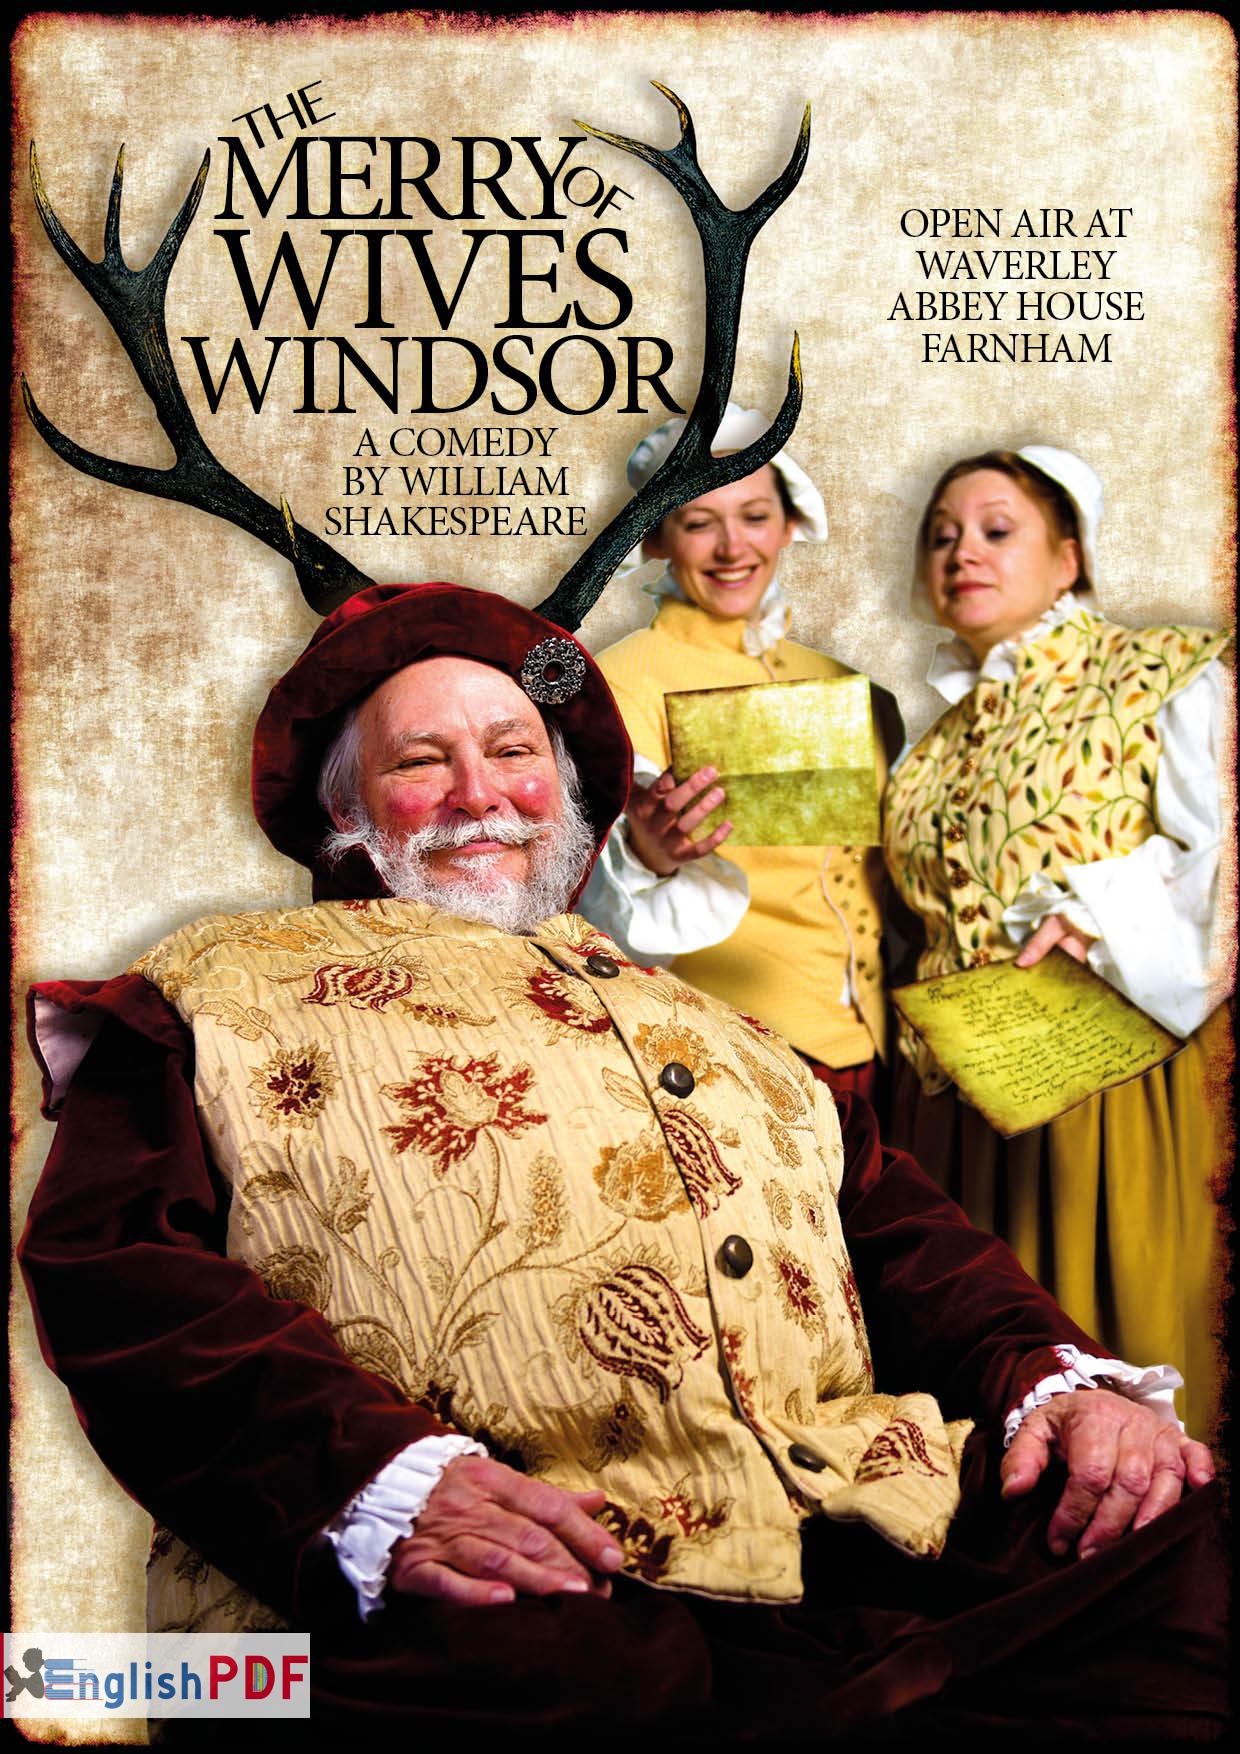 The Merry Wives of Windsor PDF Download PDF By EnglishPDF